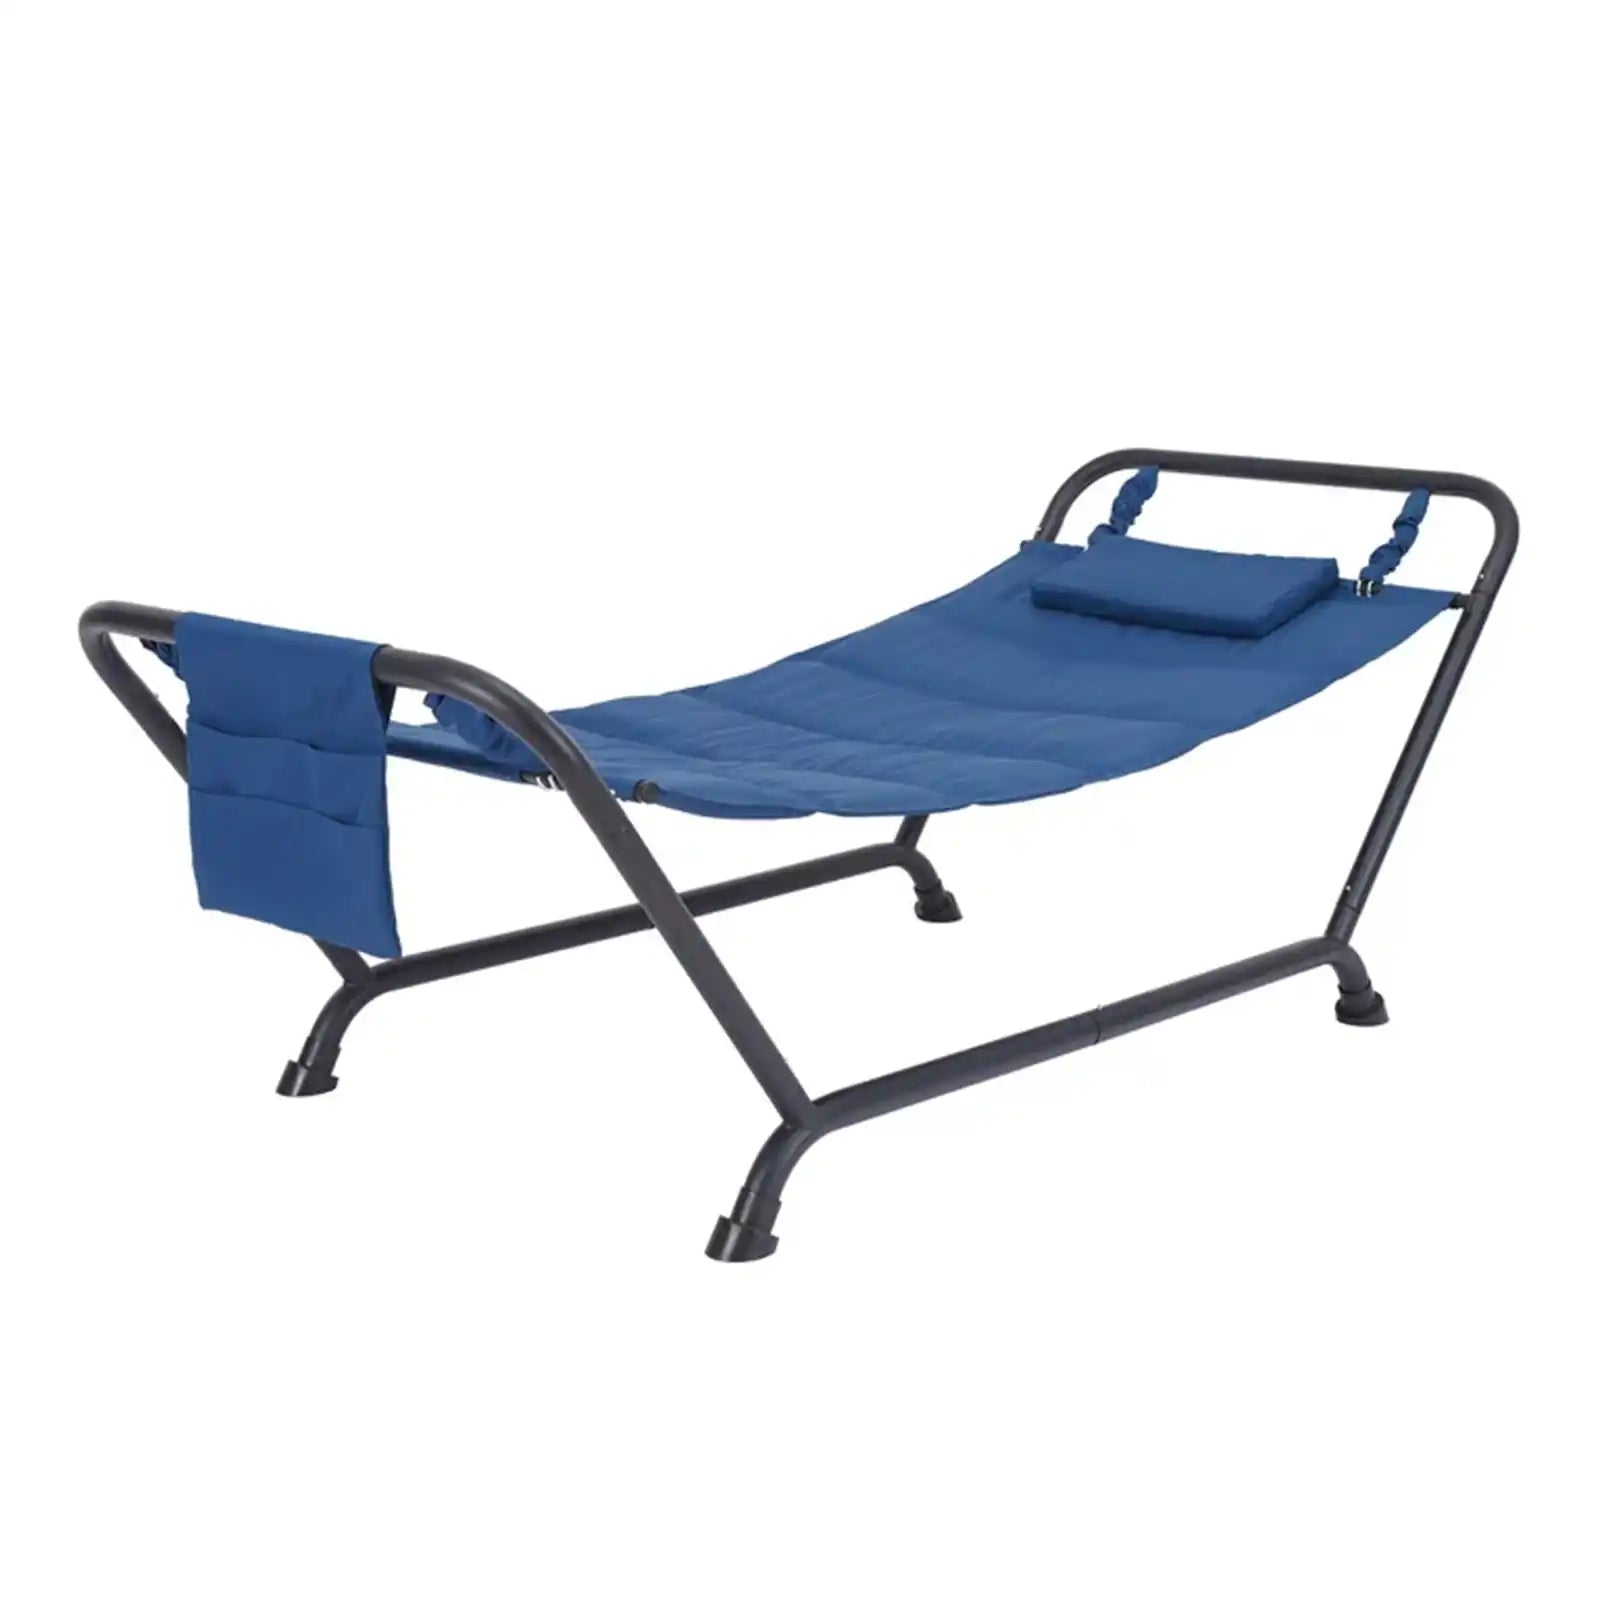 Polyester Hammock with Stand and Pillow for Outdoor Patio, Multi color, Assembled Length 90.55"